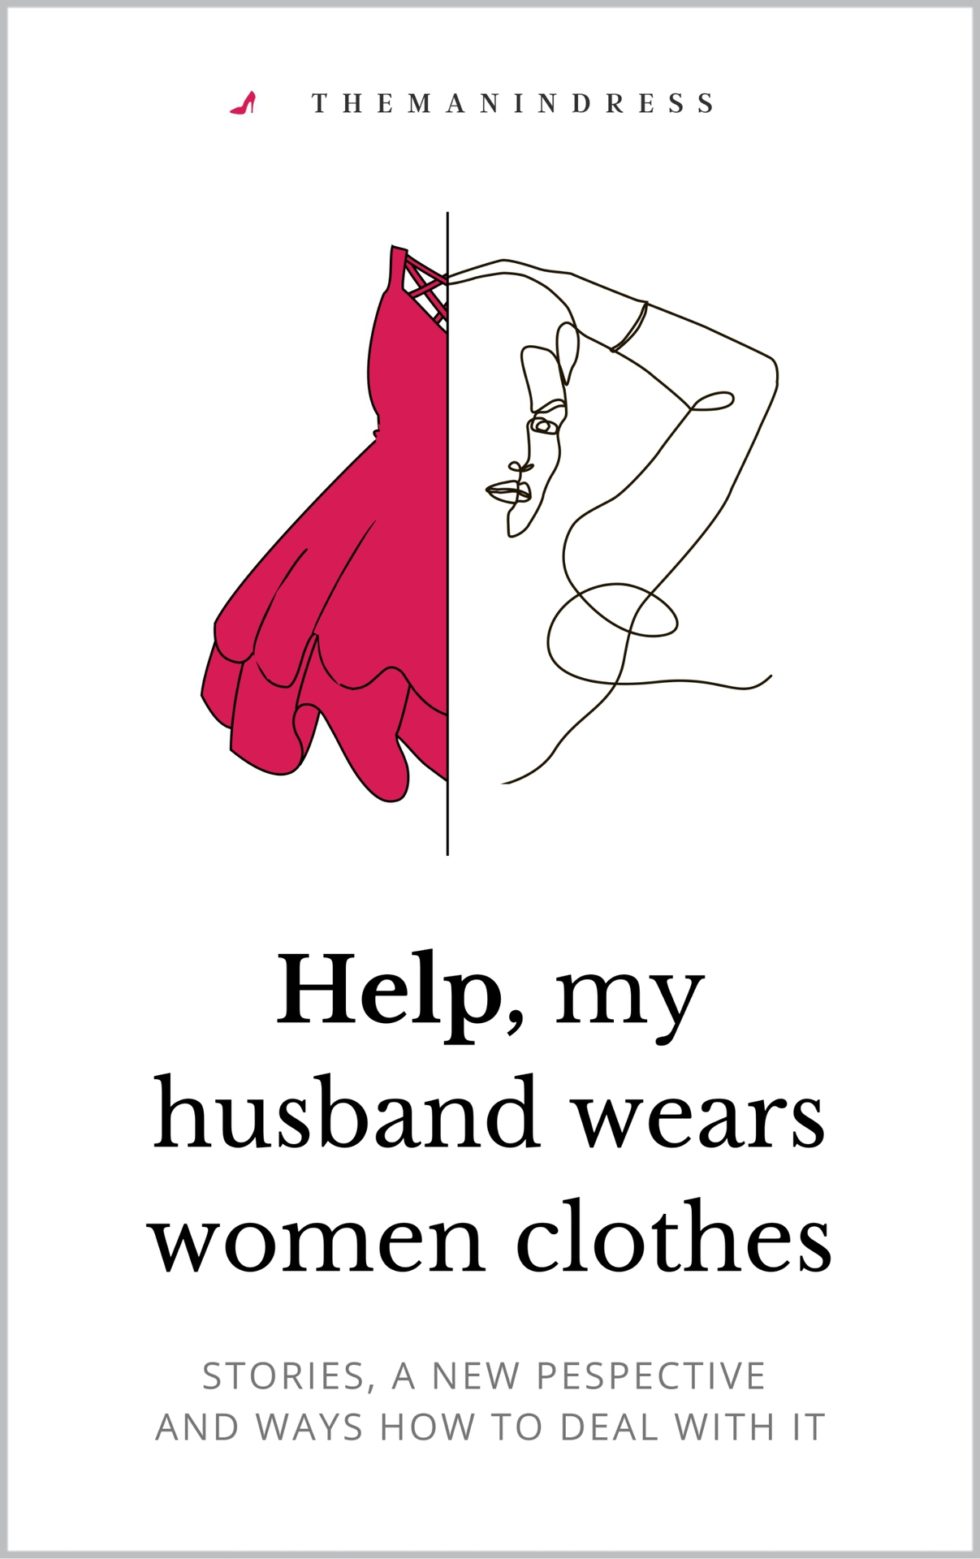 My husband wears women's clothing - how do I deal with it? - The Man in ...